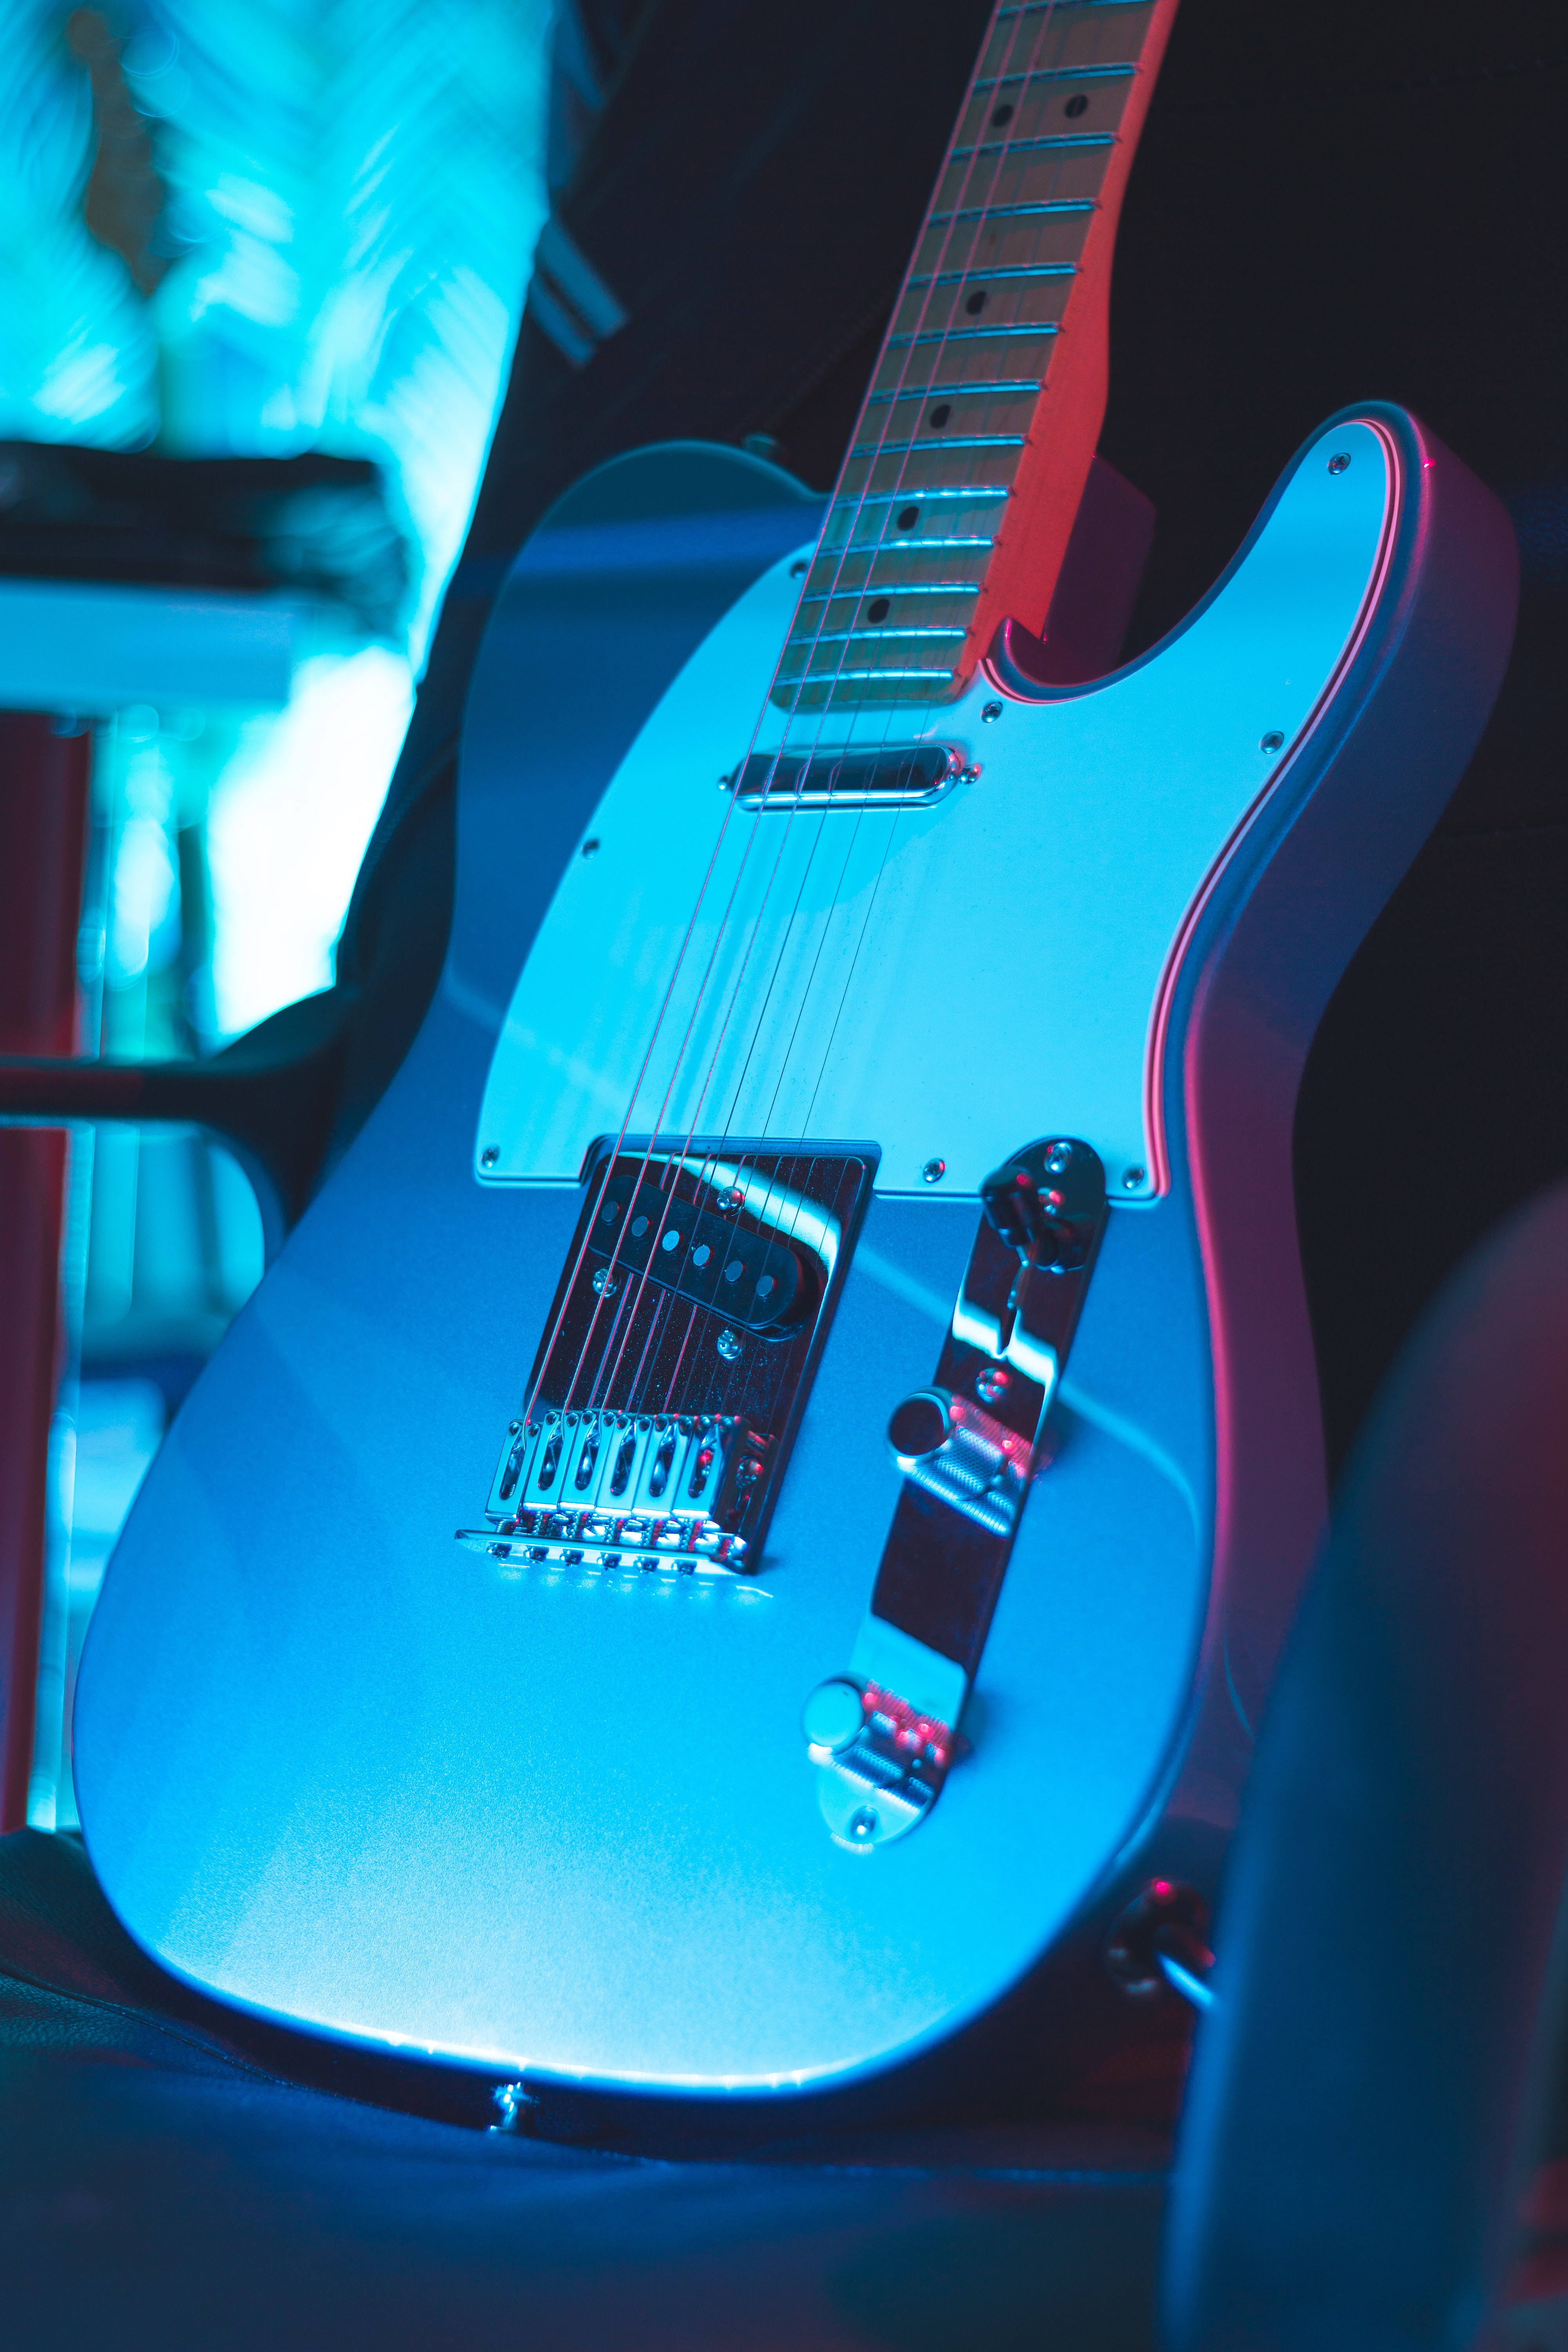 musical instrument, guitar, music, neon, electronic